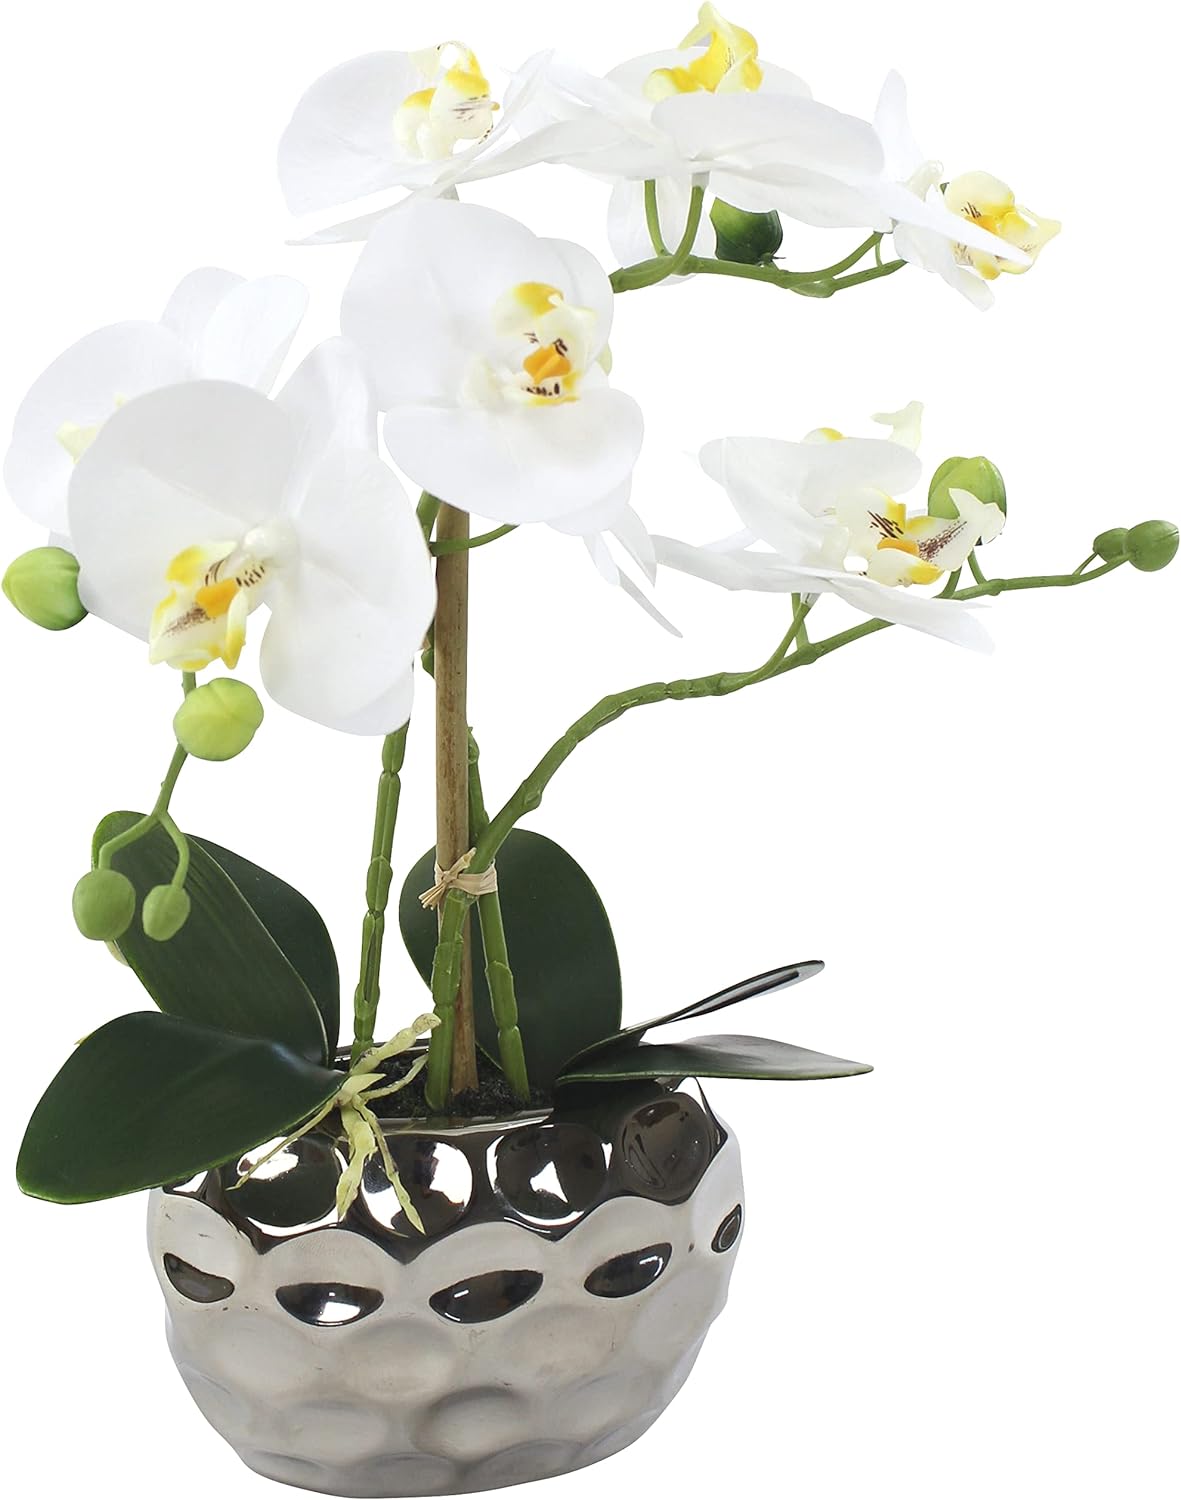 DARO DEKO Artificial Orchid Plant Oval Pot Silver High Gloss and White Flowers 33 cm